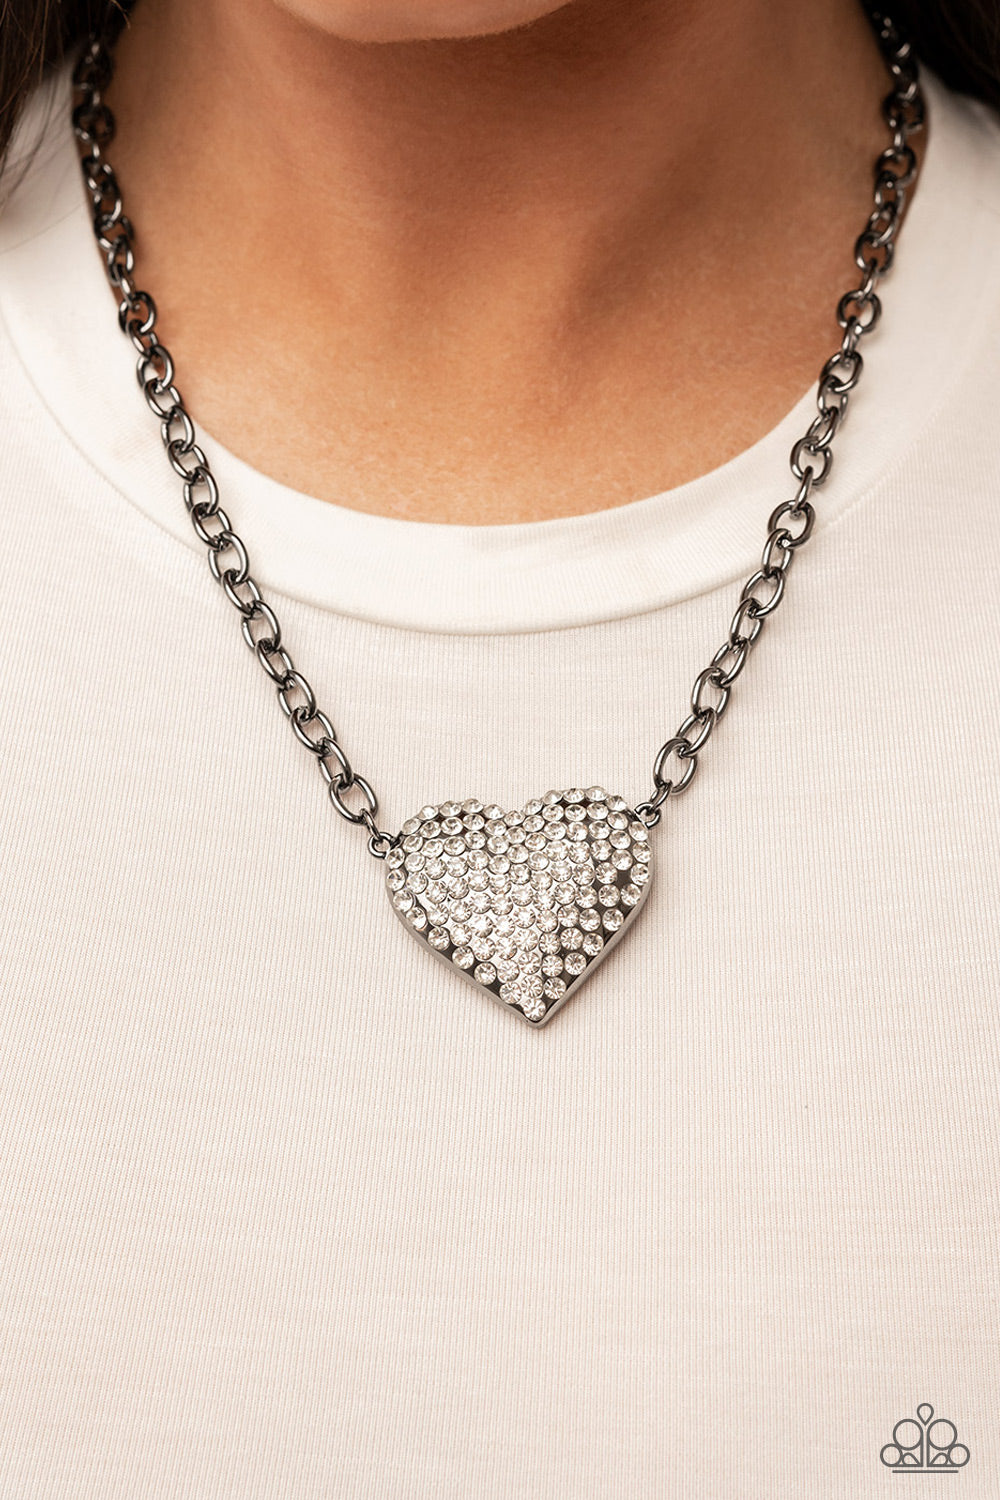 Heartbreakingly Blingy Necklace (Gold, Black)